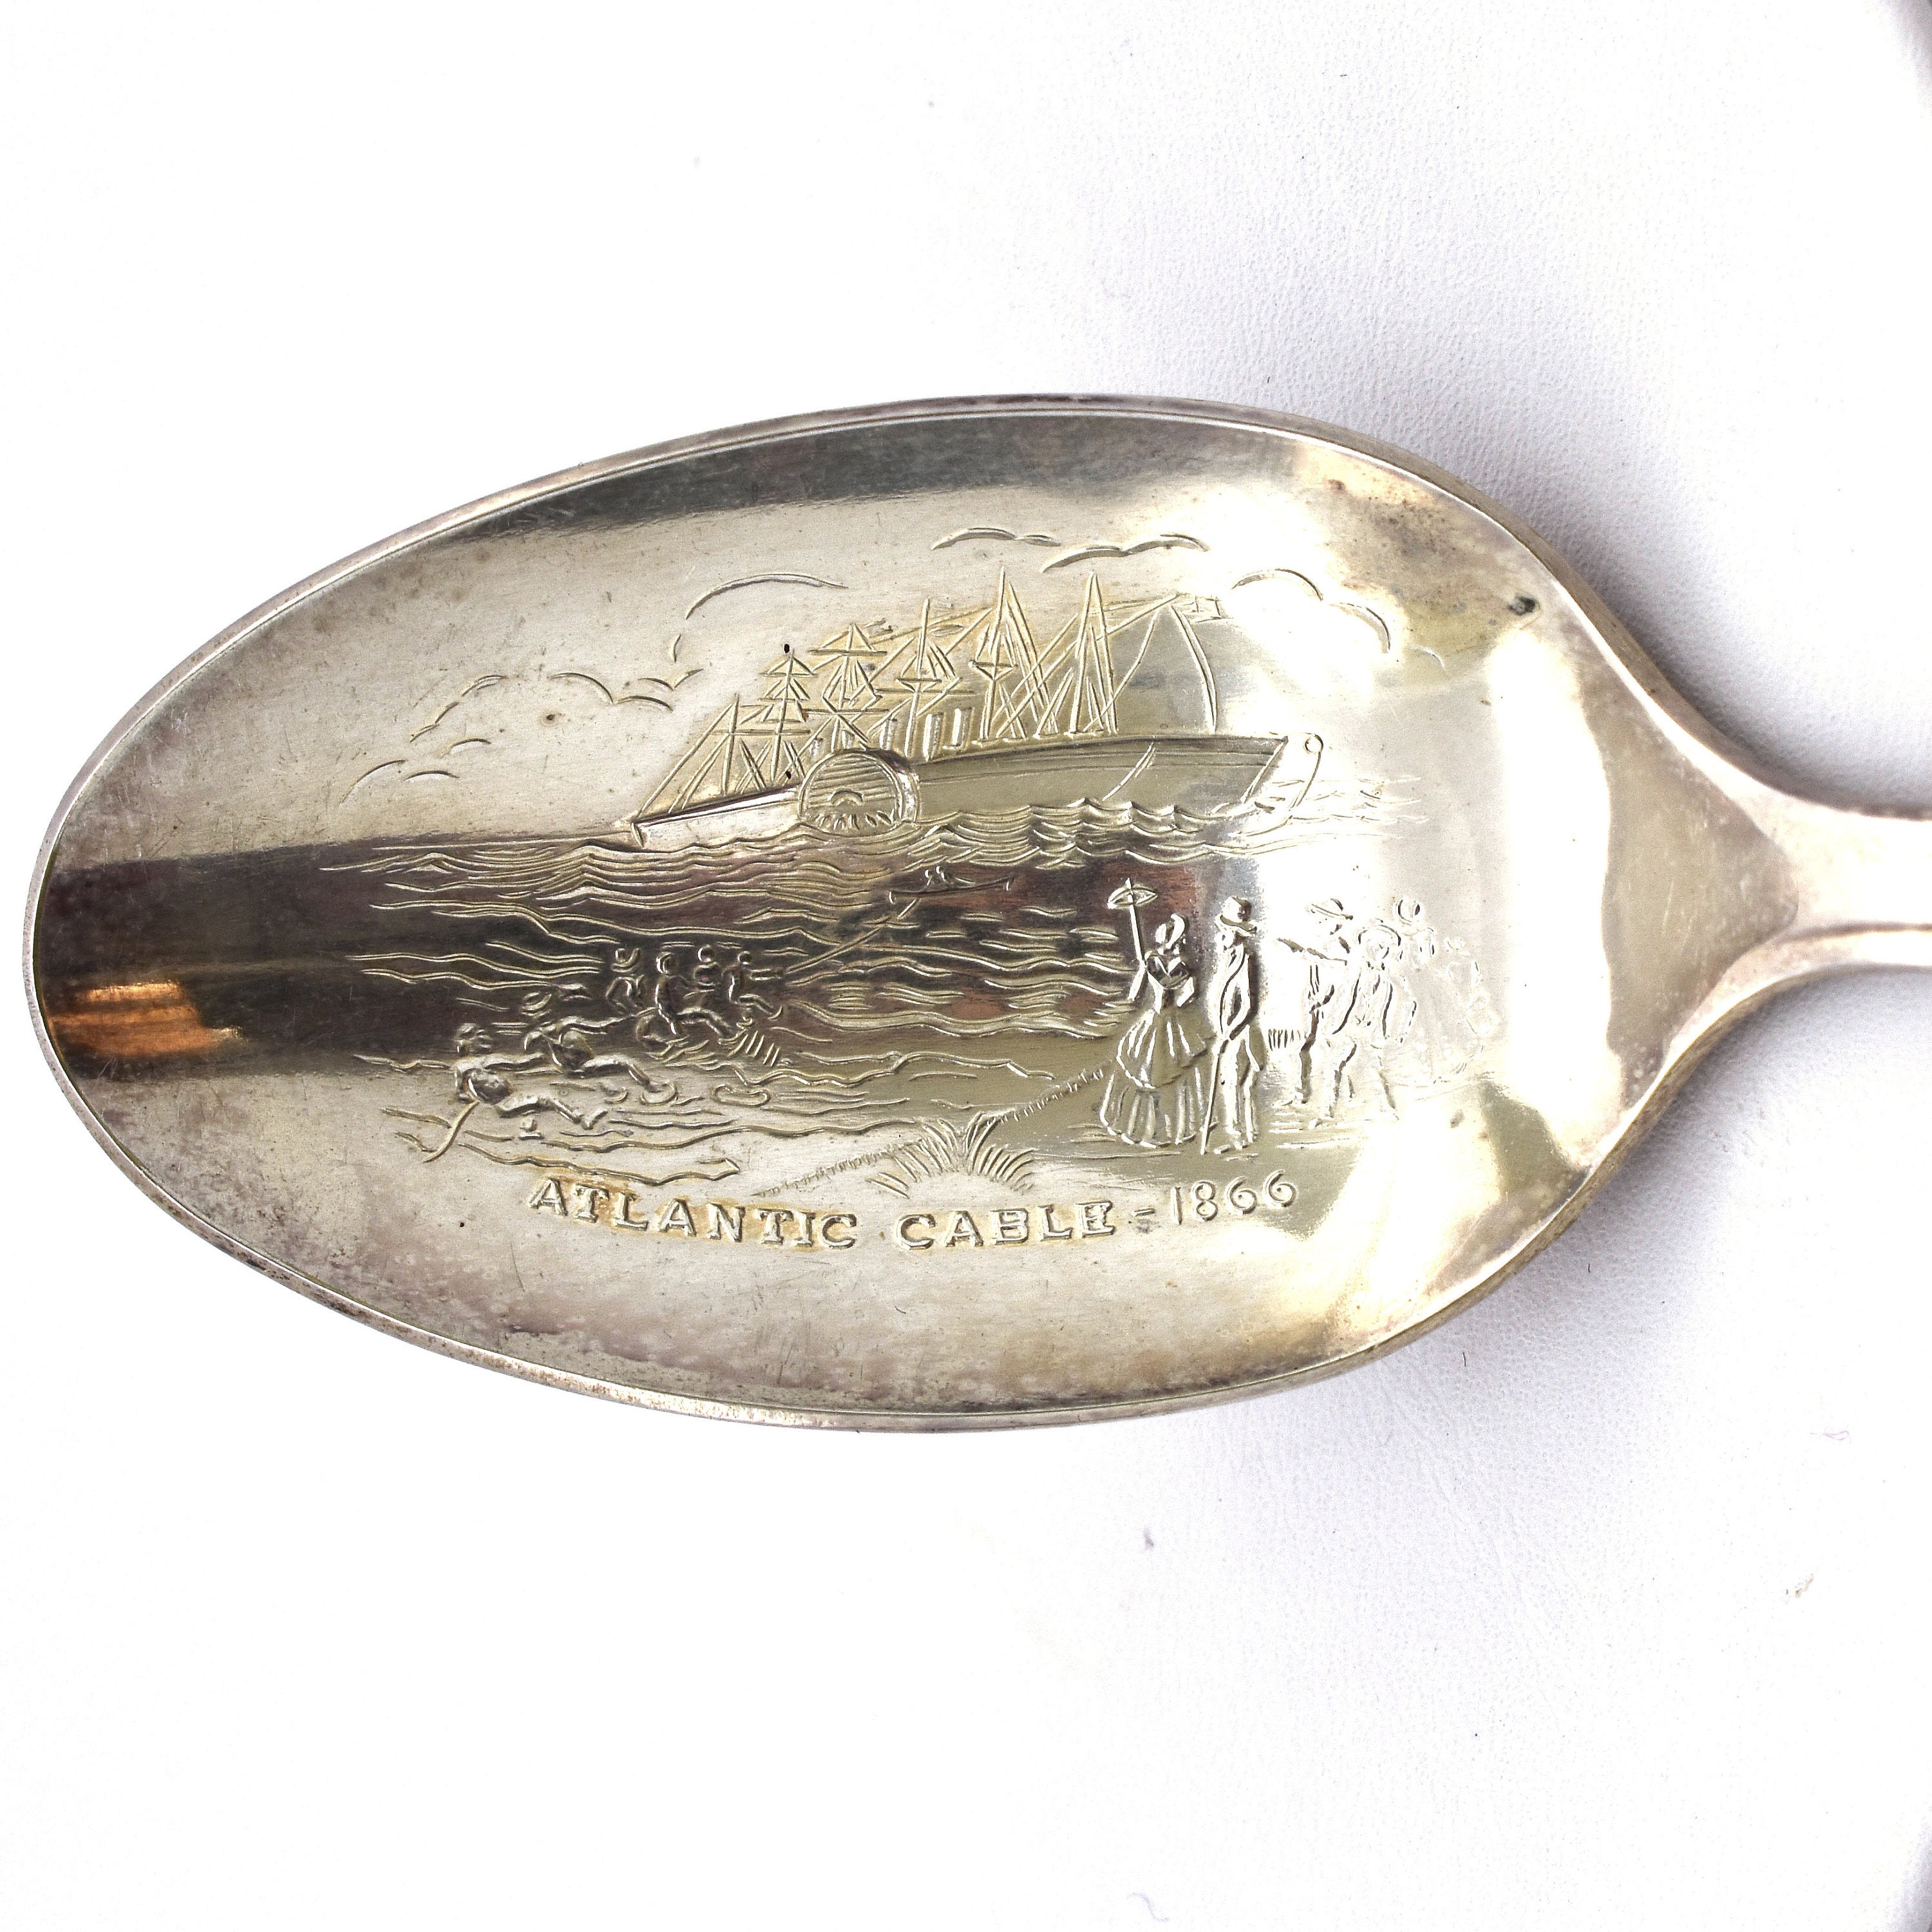 Vintage Silverplate Andrew Johnson Spoon Estate Wm Rogers Presidents Series  Atlantic Cable Holiday Gift -  Canada